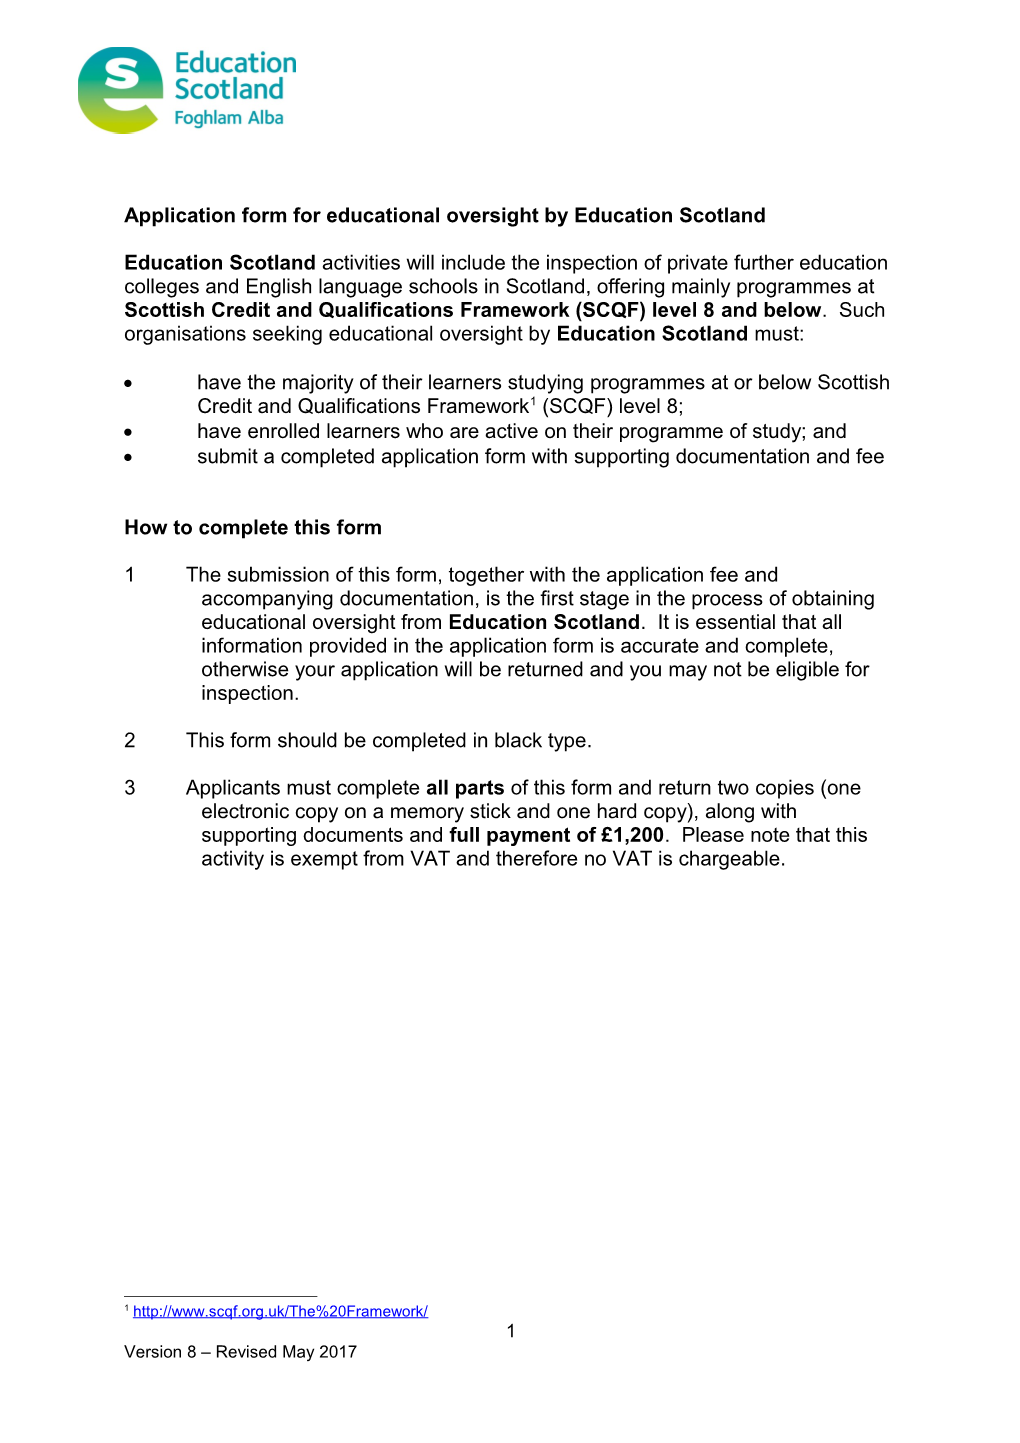 Application Form for Educational Oversight by Education Scotland